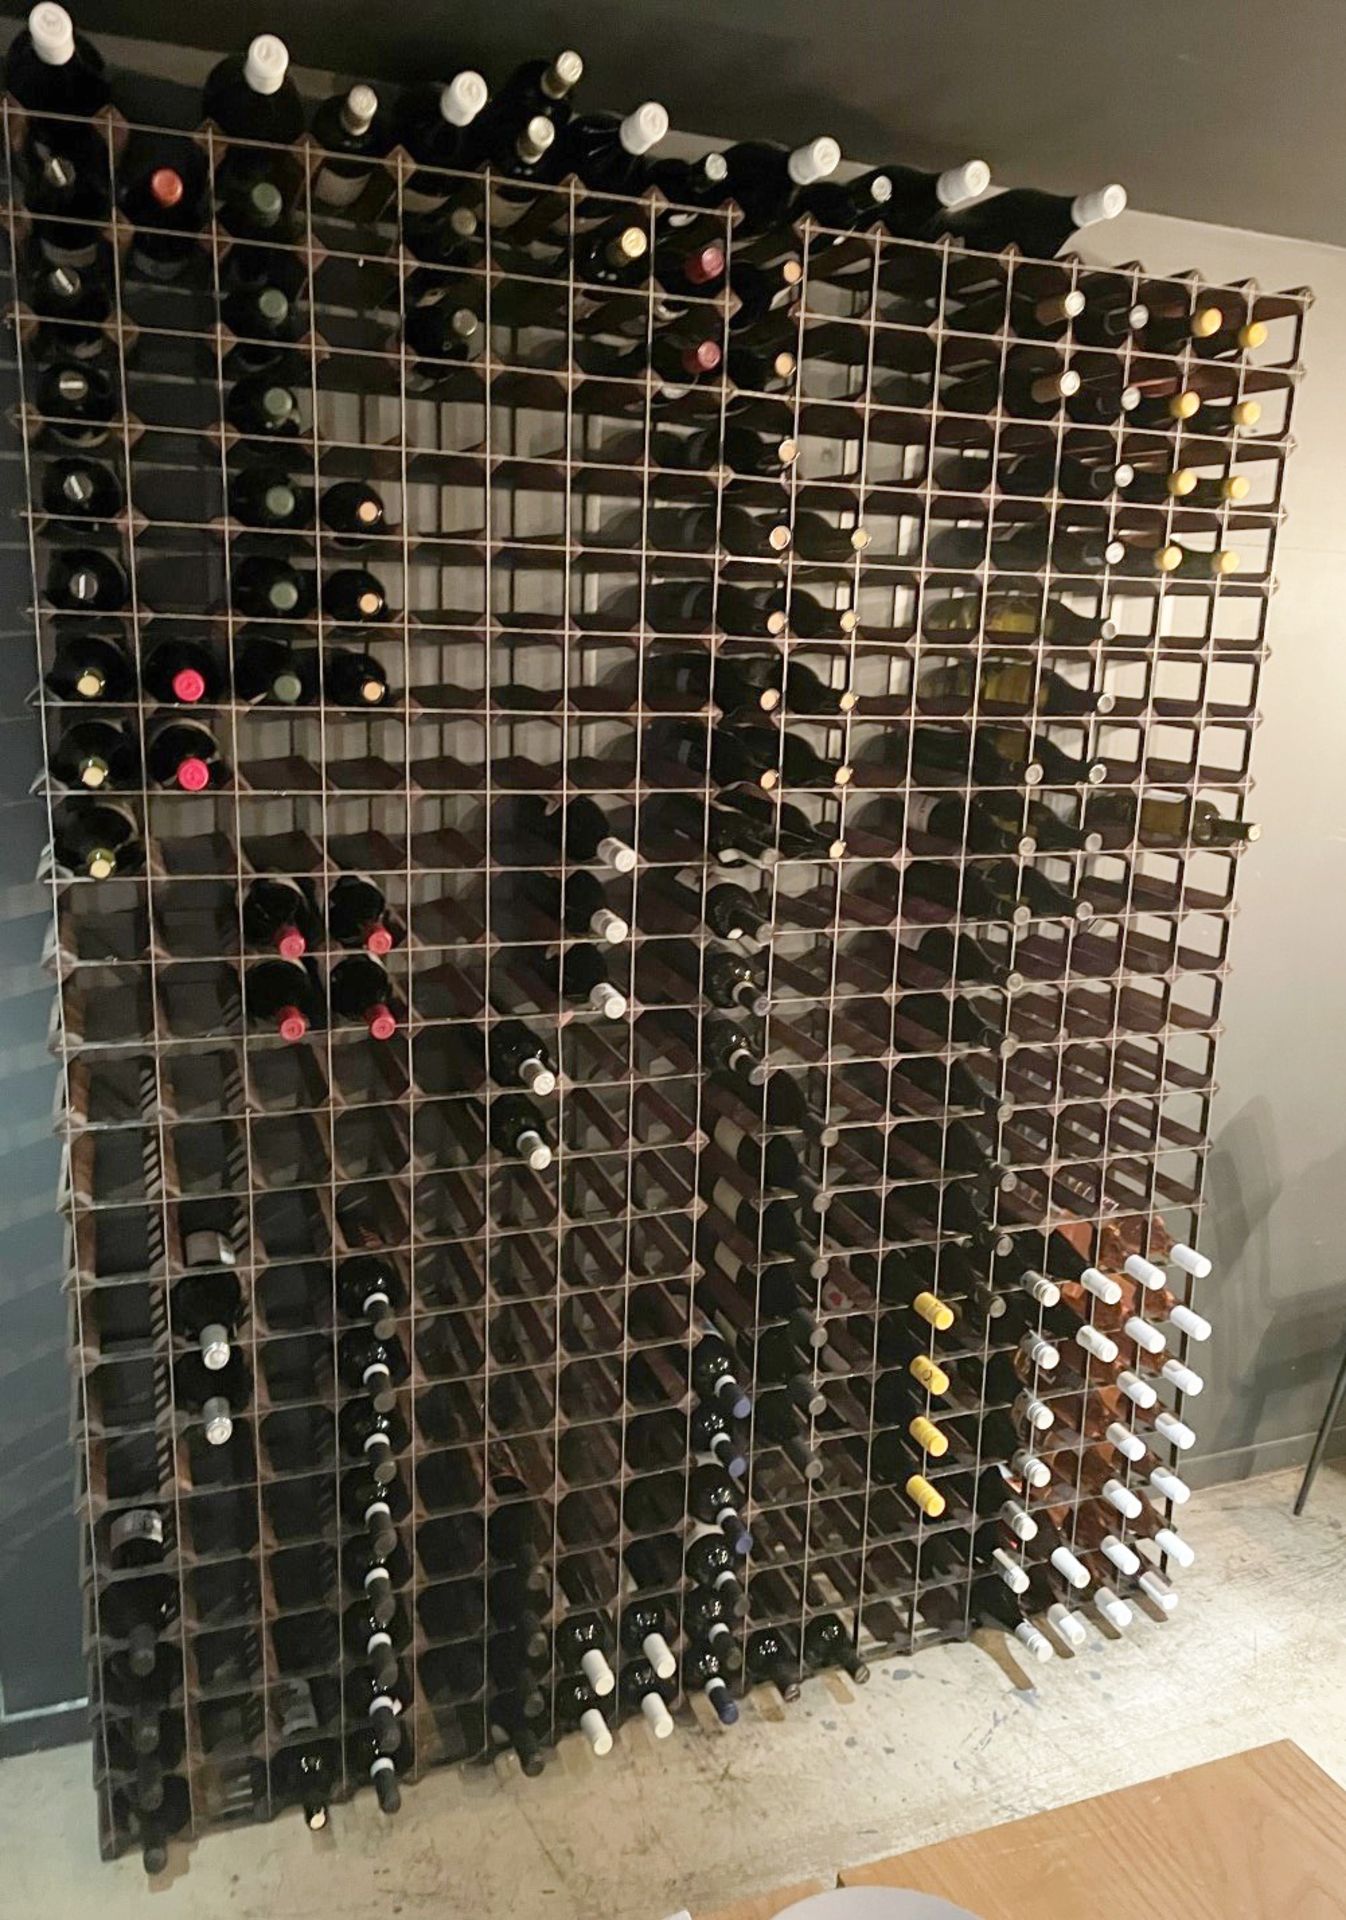 1 x Large Bank Of Wine Racking - With A Capacity Of Up To 374 x Bottles - Dimensions: H206 x 165 x - Image 2 of 7